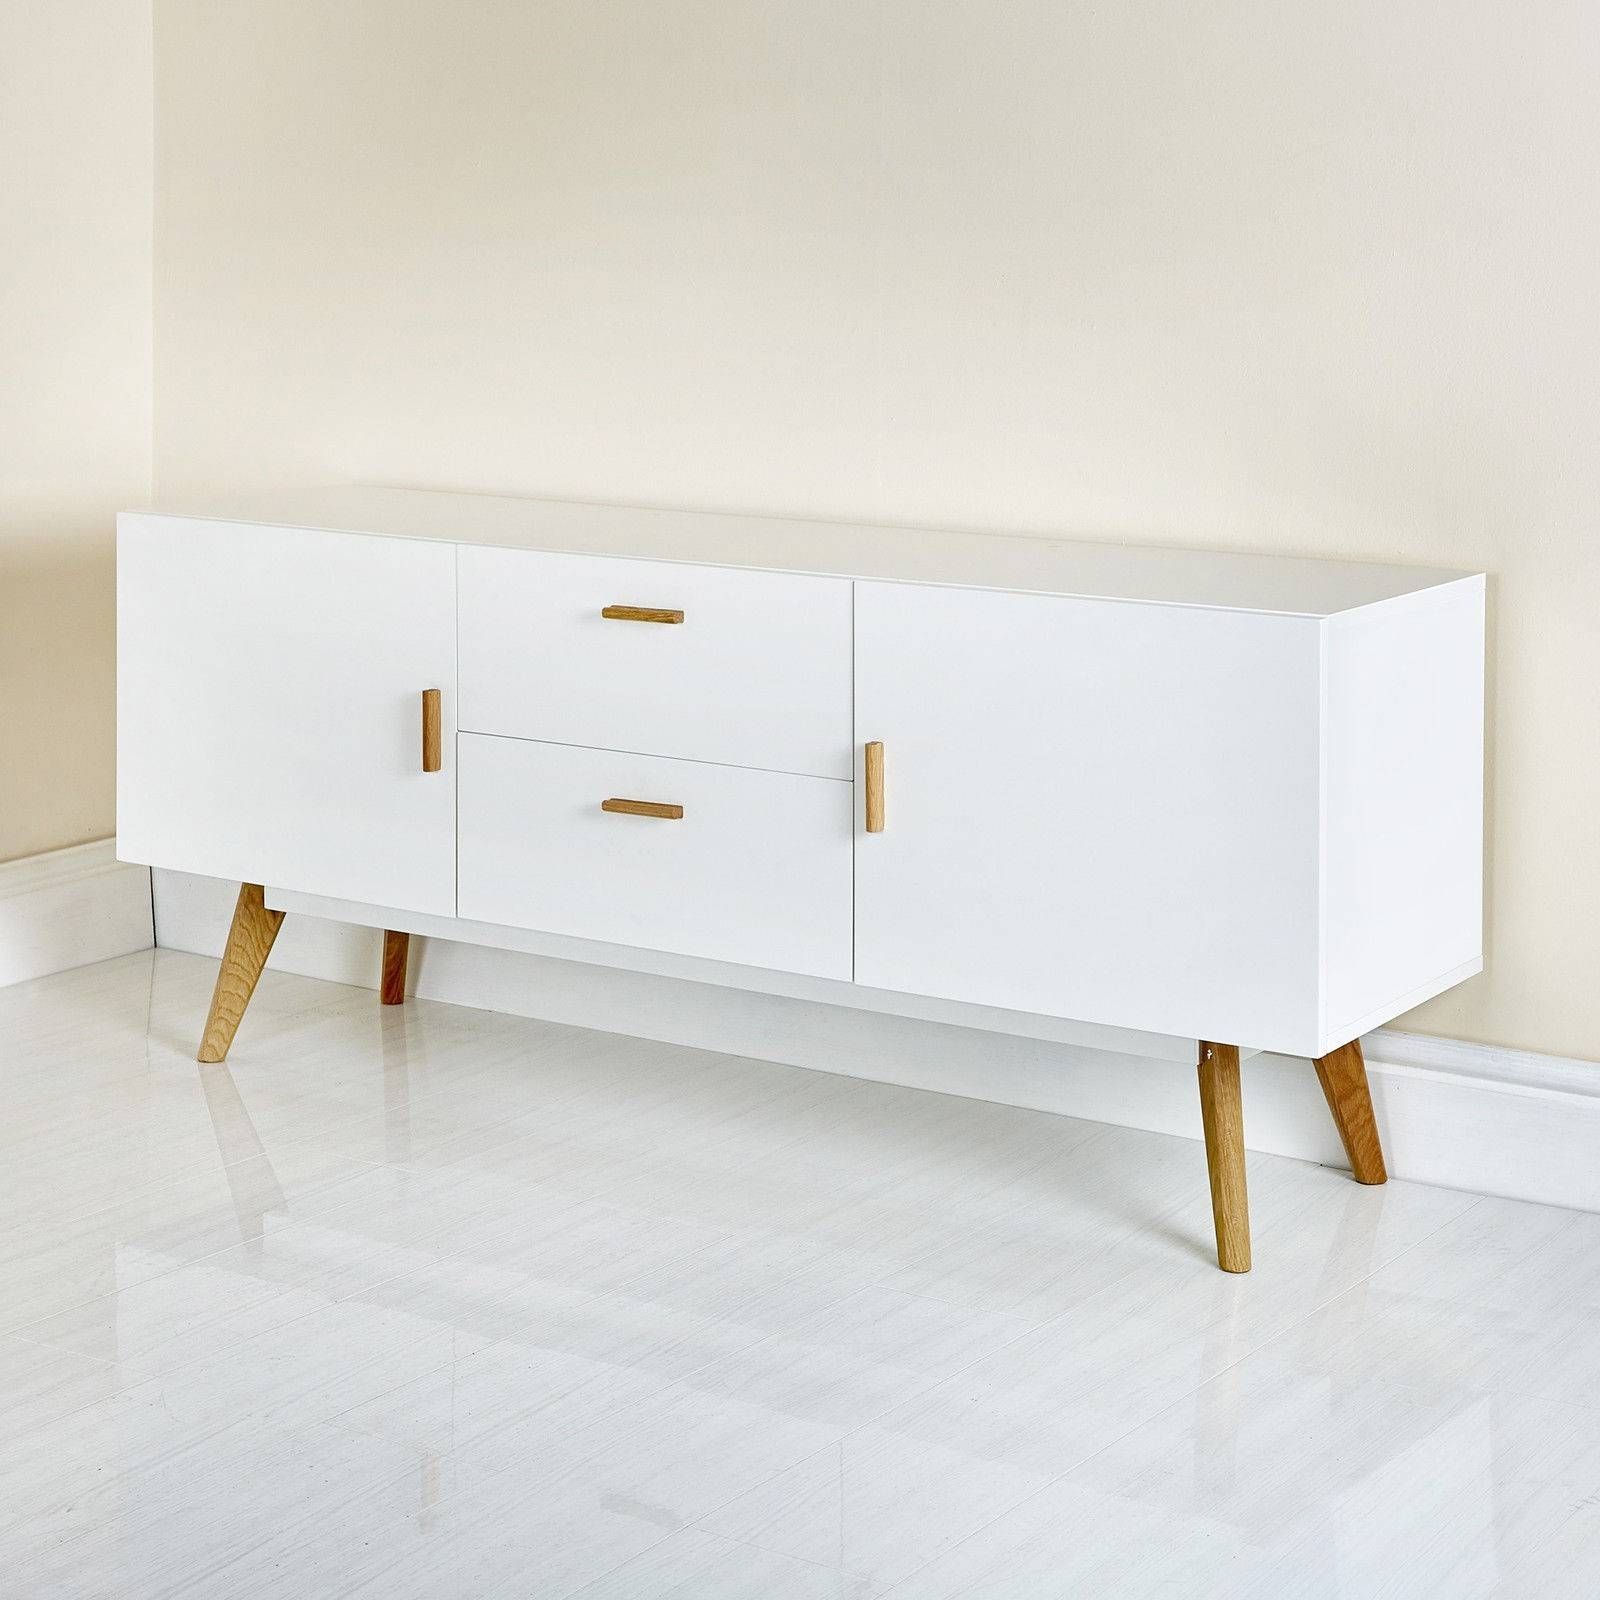 Scandinavian Retro Style White Sideboard Abreo Home Furniture Pertaining To Scandinavian Sideboards (View 1 of 15)